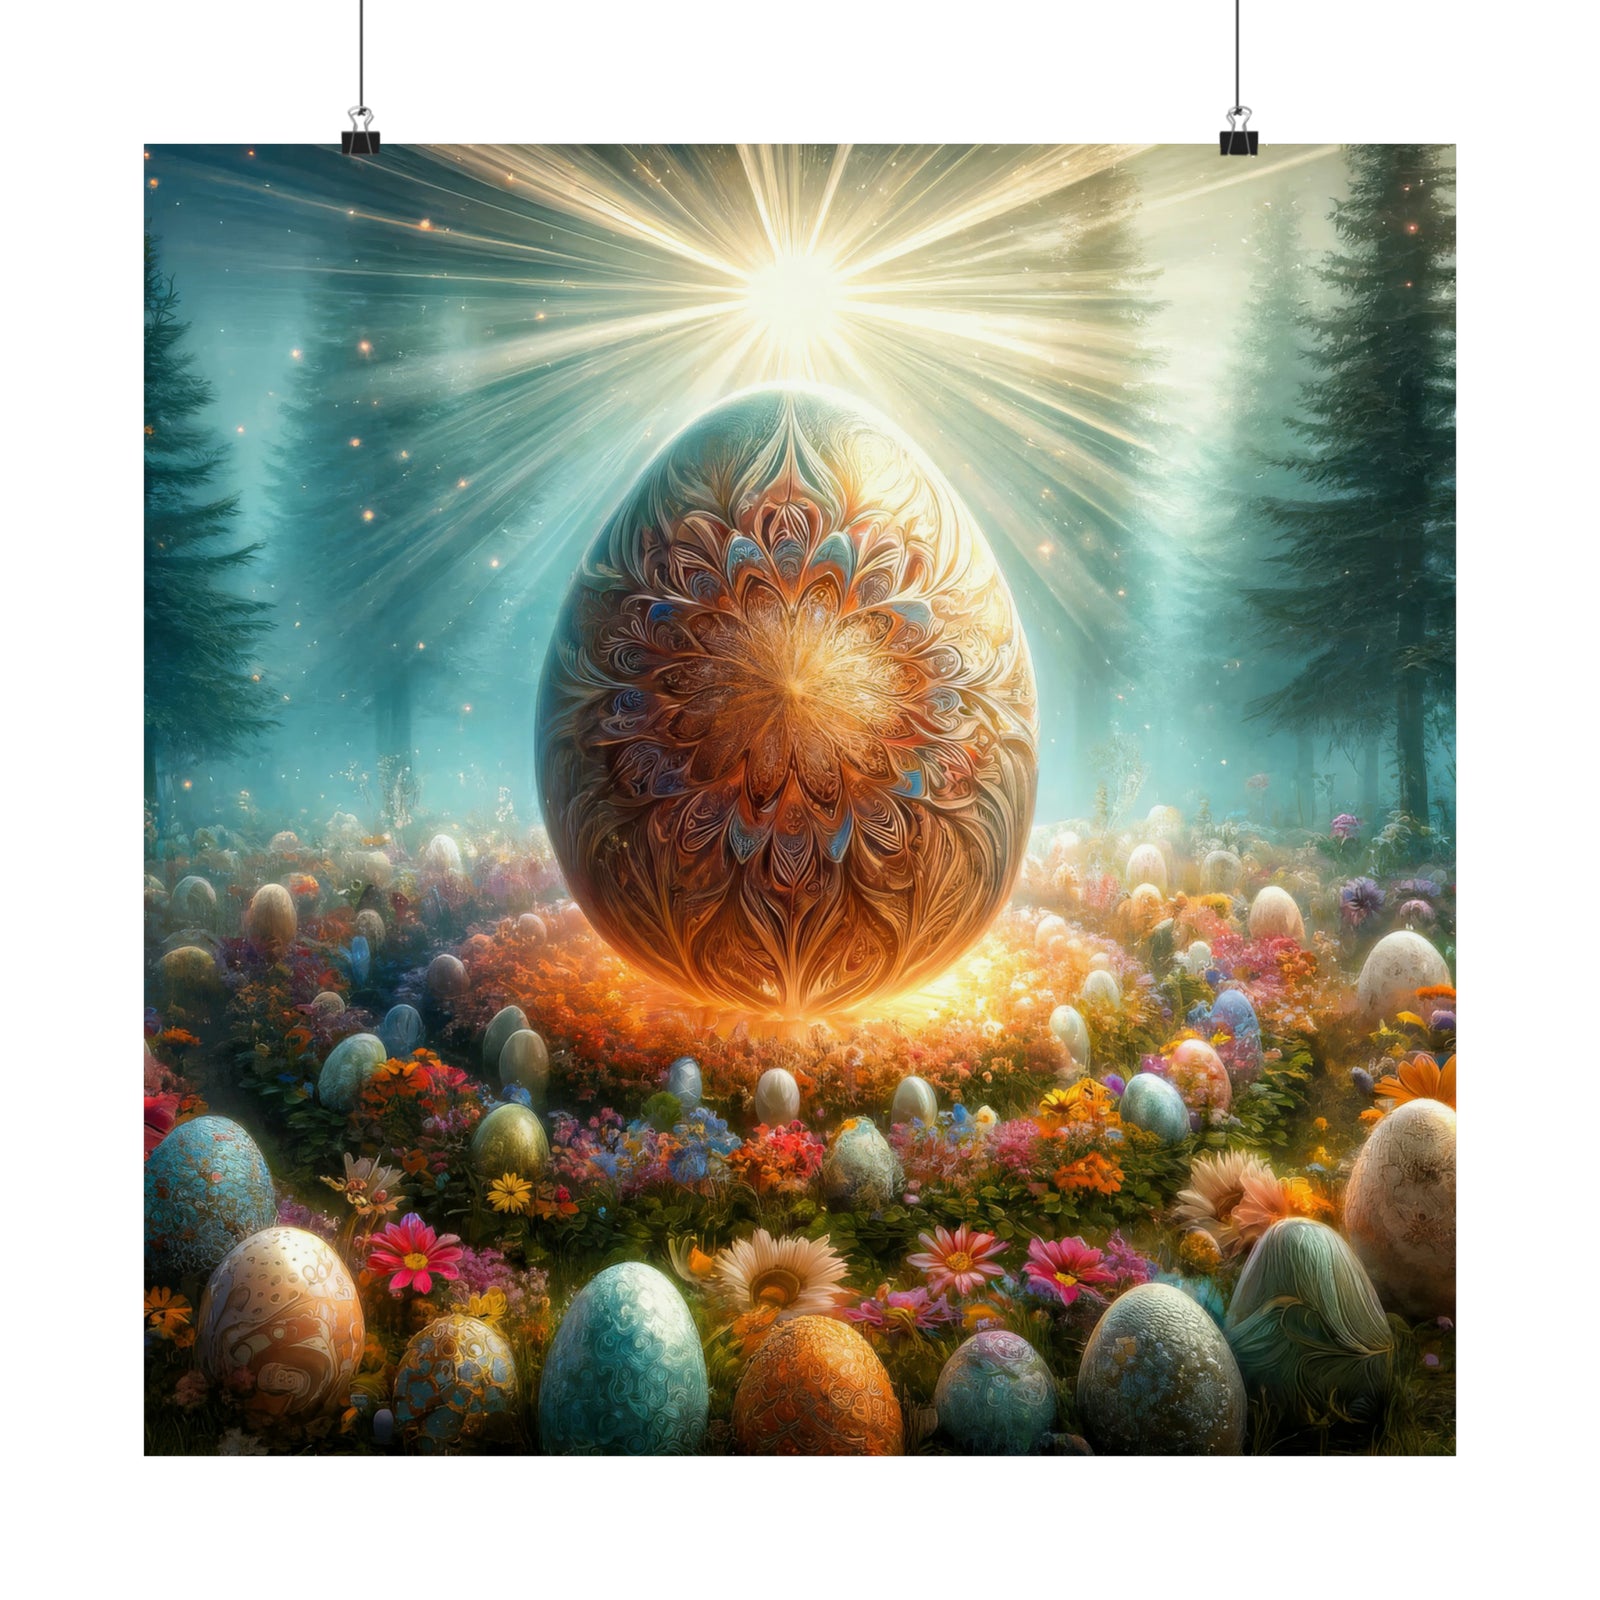 The Egg's Benediction Poster